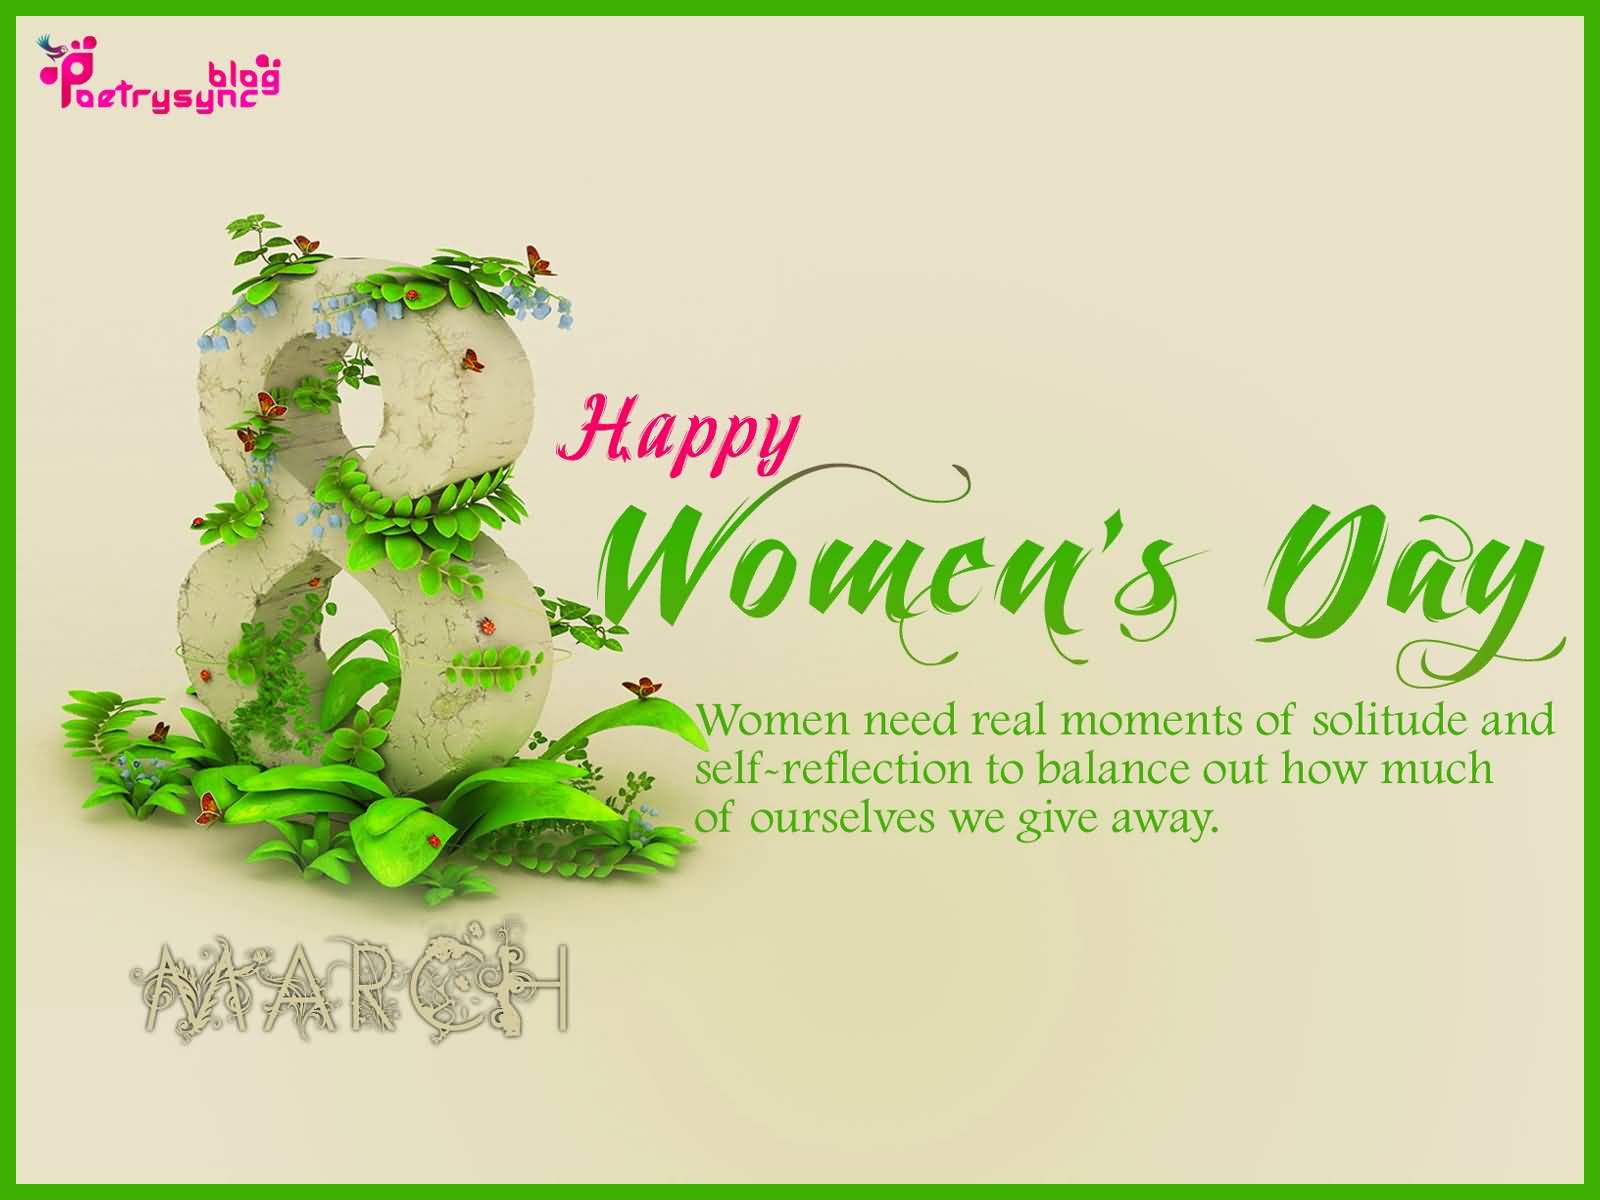 Happy Women’s Day 8 March Card